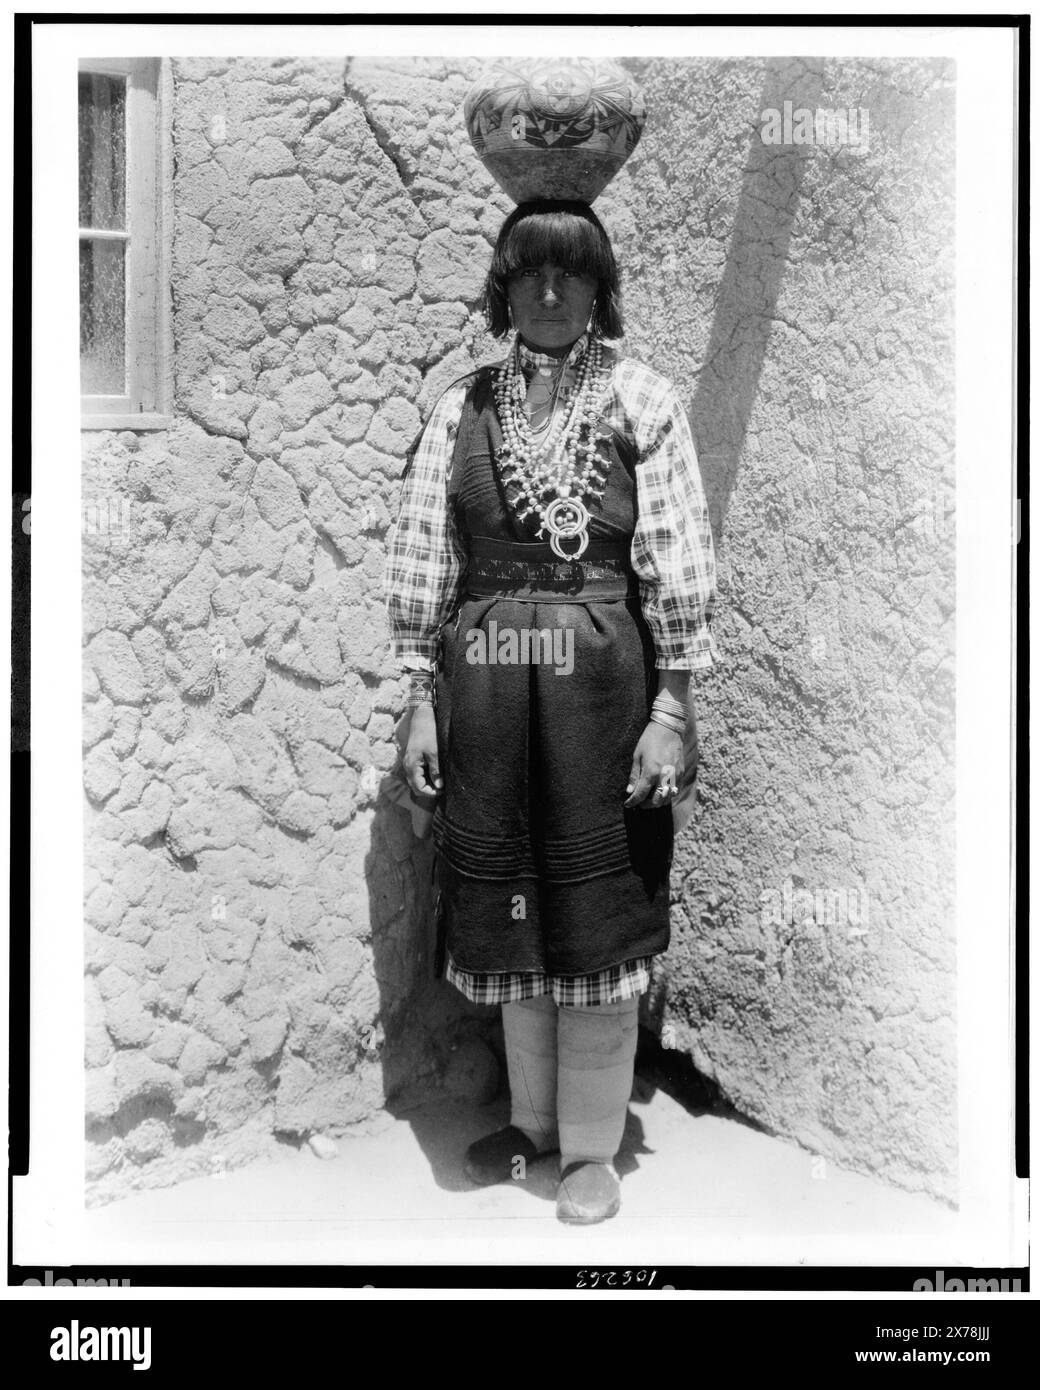 Shuati Sia. Full-length portrait of a woman standing, facing front, with pot on head, Edward S. Curtis Collection., Published in: The North American Indian / Edward S. Curtis. [Seattle, Wash.] : Edward S. Curtis, 1907-30 suppl., v. 16, p. 561.. Indians of North America, Clothing & dress, 1920-1930. , Sia Indians, Clothing & dress, 1920-1930. Stock Photo